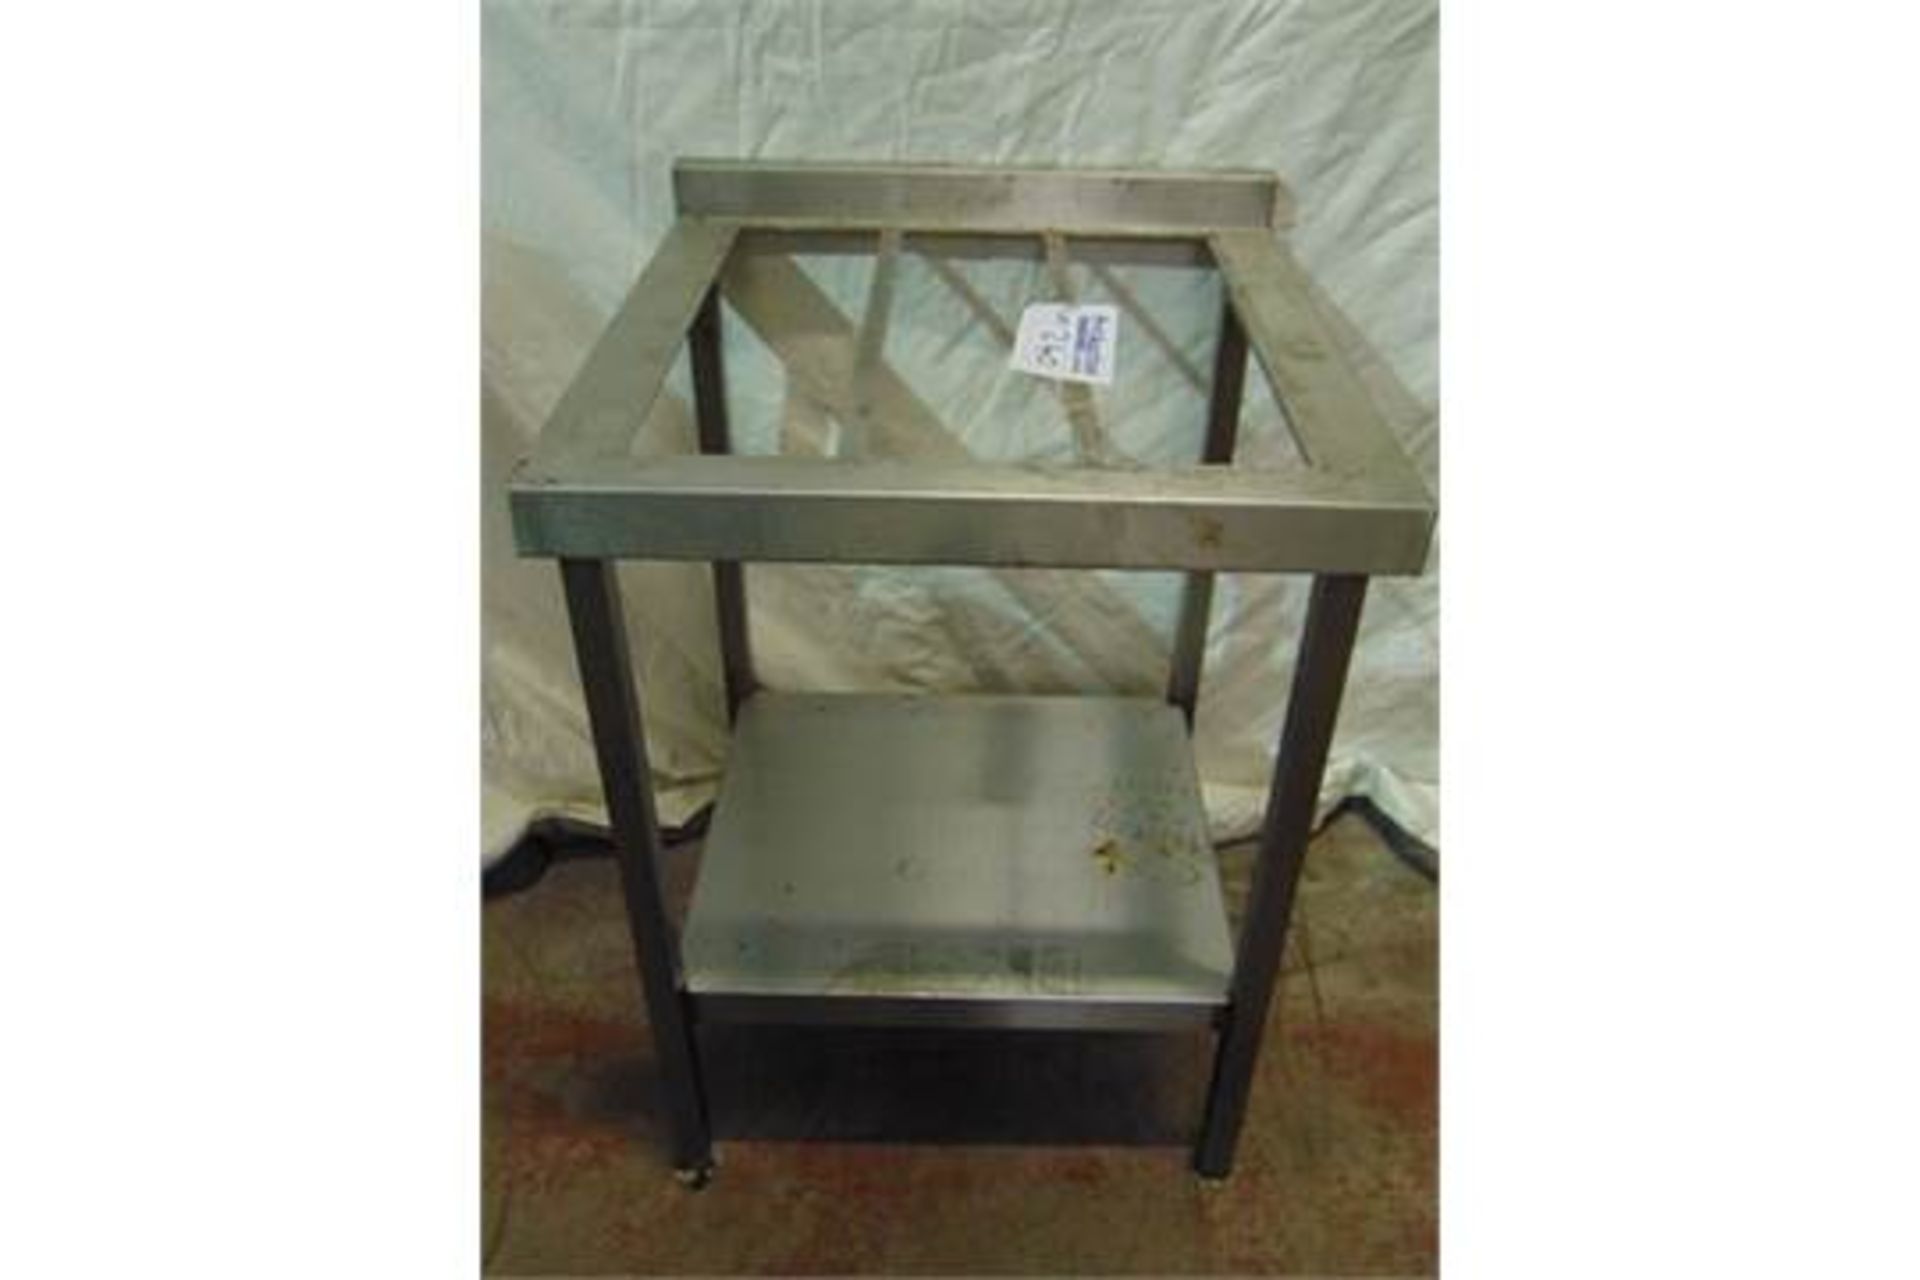 Stainless steel preparation table frame no top 600mm x 600mm x 790mm